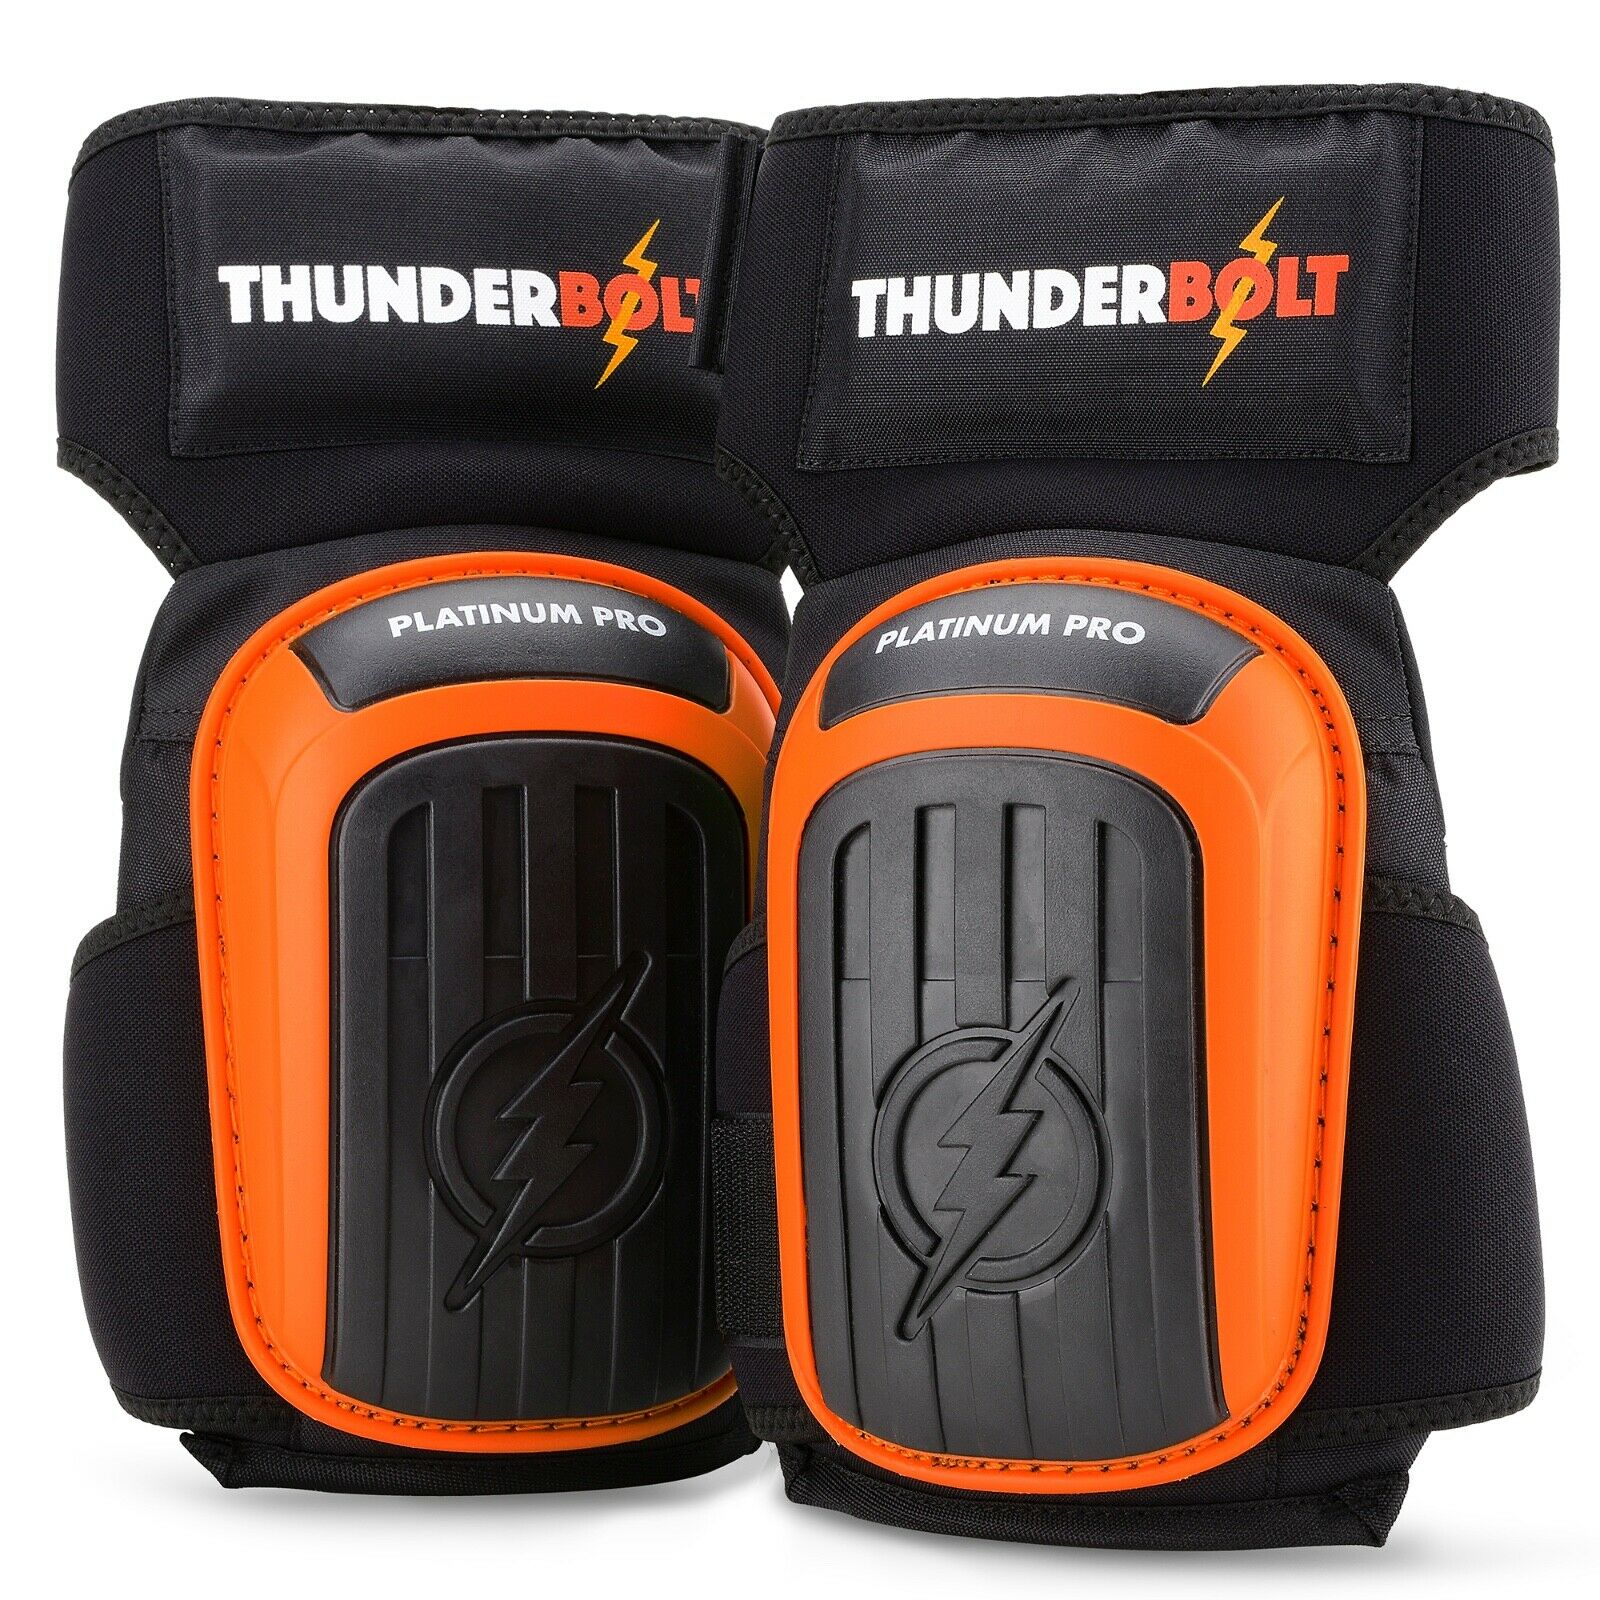 Thunderbolt Knee Pads For Work, Construction, Gardening, Flooring And Carpentry